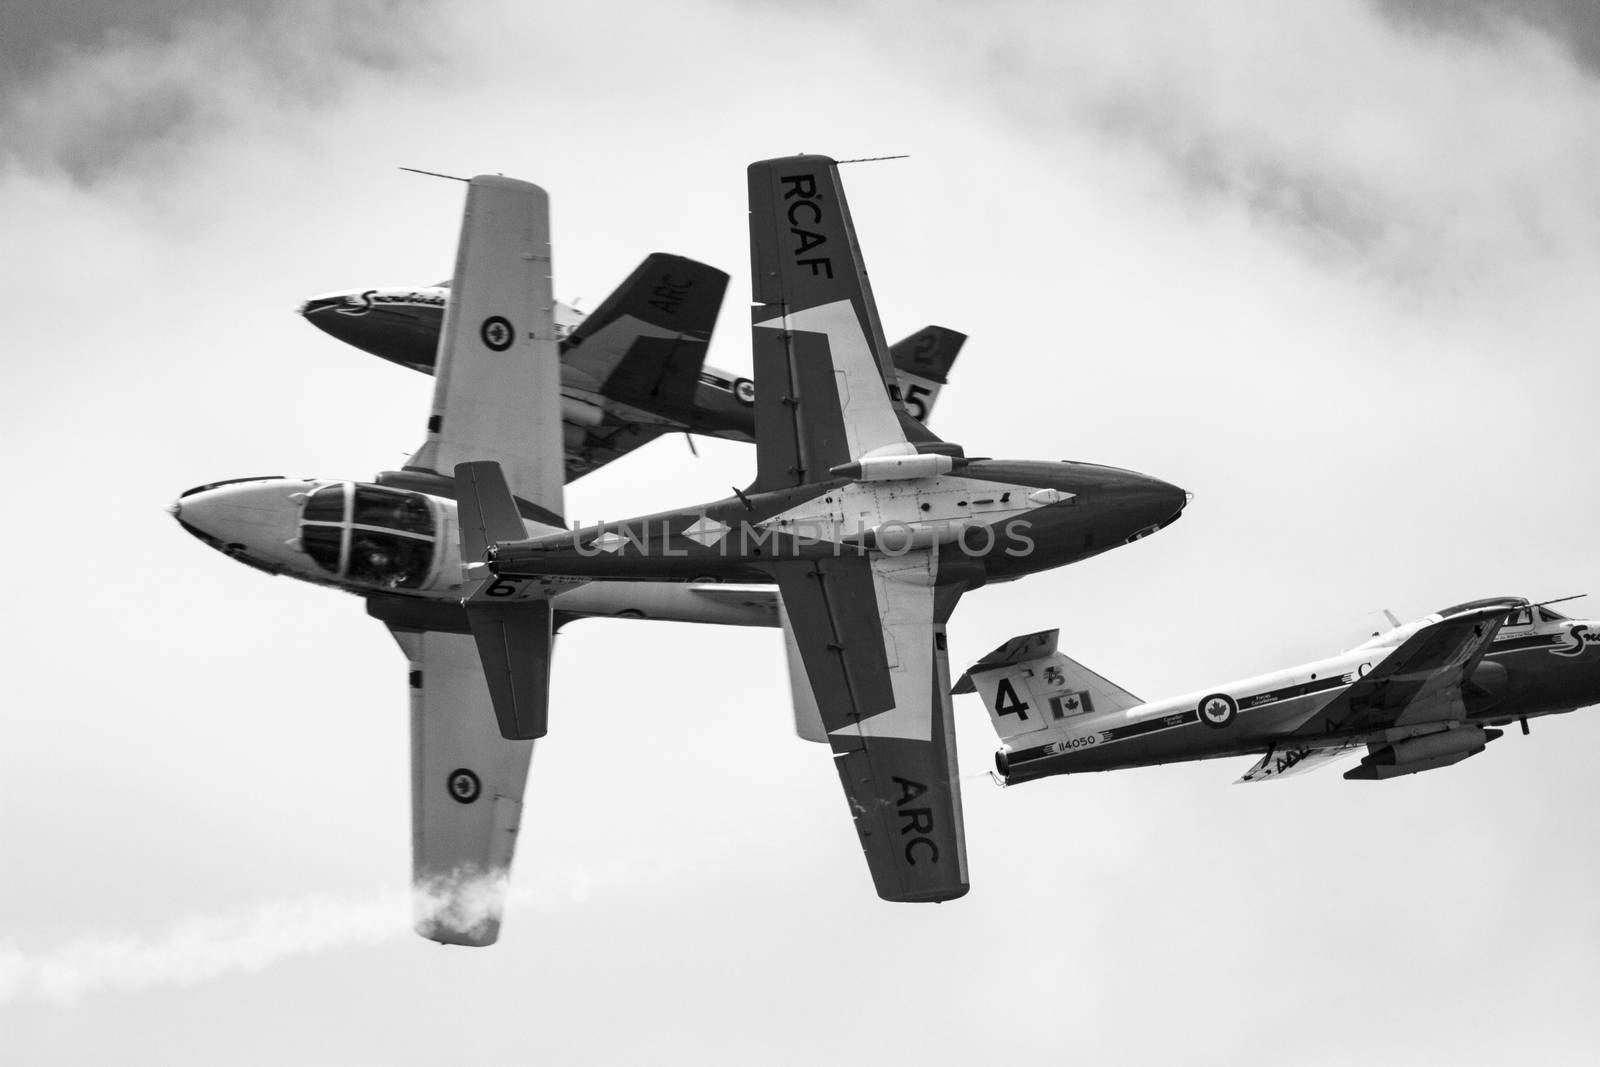 SPRINGBANK CANADA - JUL 20, 2015: The Snowbirds Demonstration Team demonstrate the skill, professionalism, and teamwork of Canadian Forces personnel during the Wings Over Lethbridge..